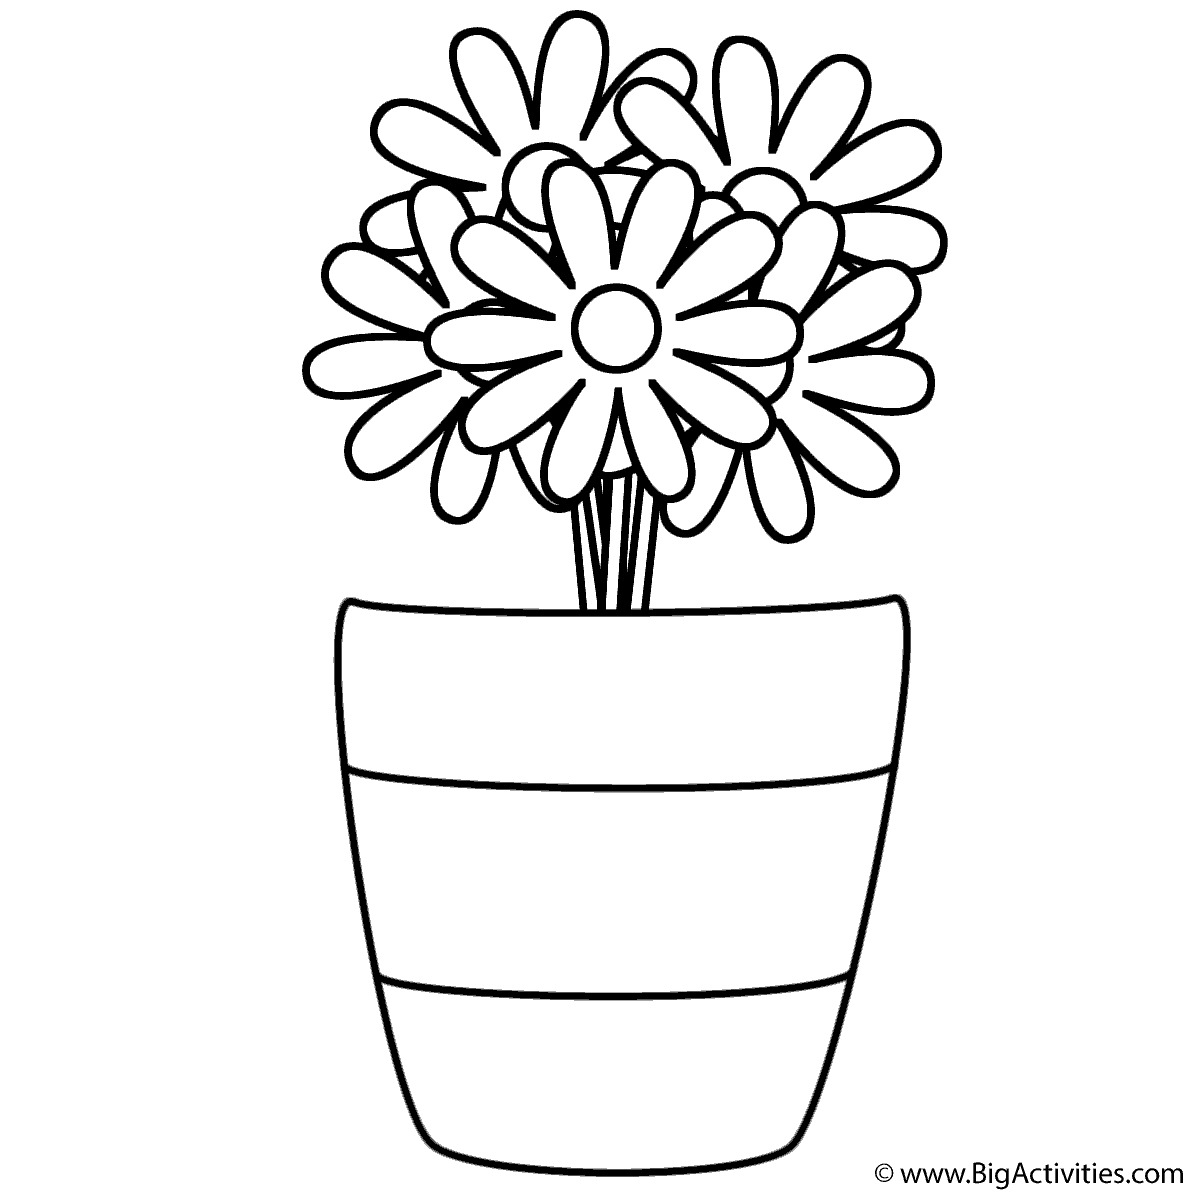 Flowers in Vase with Stripes - Coloring Page (Mother's Day)